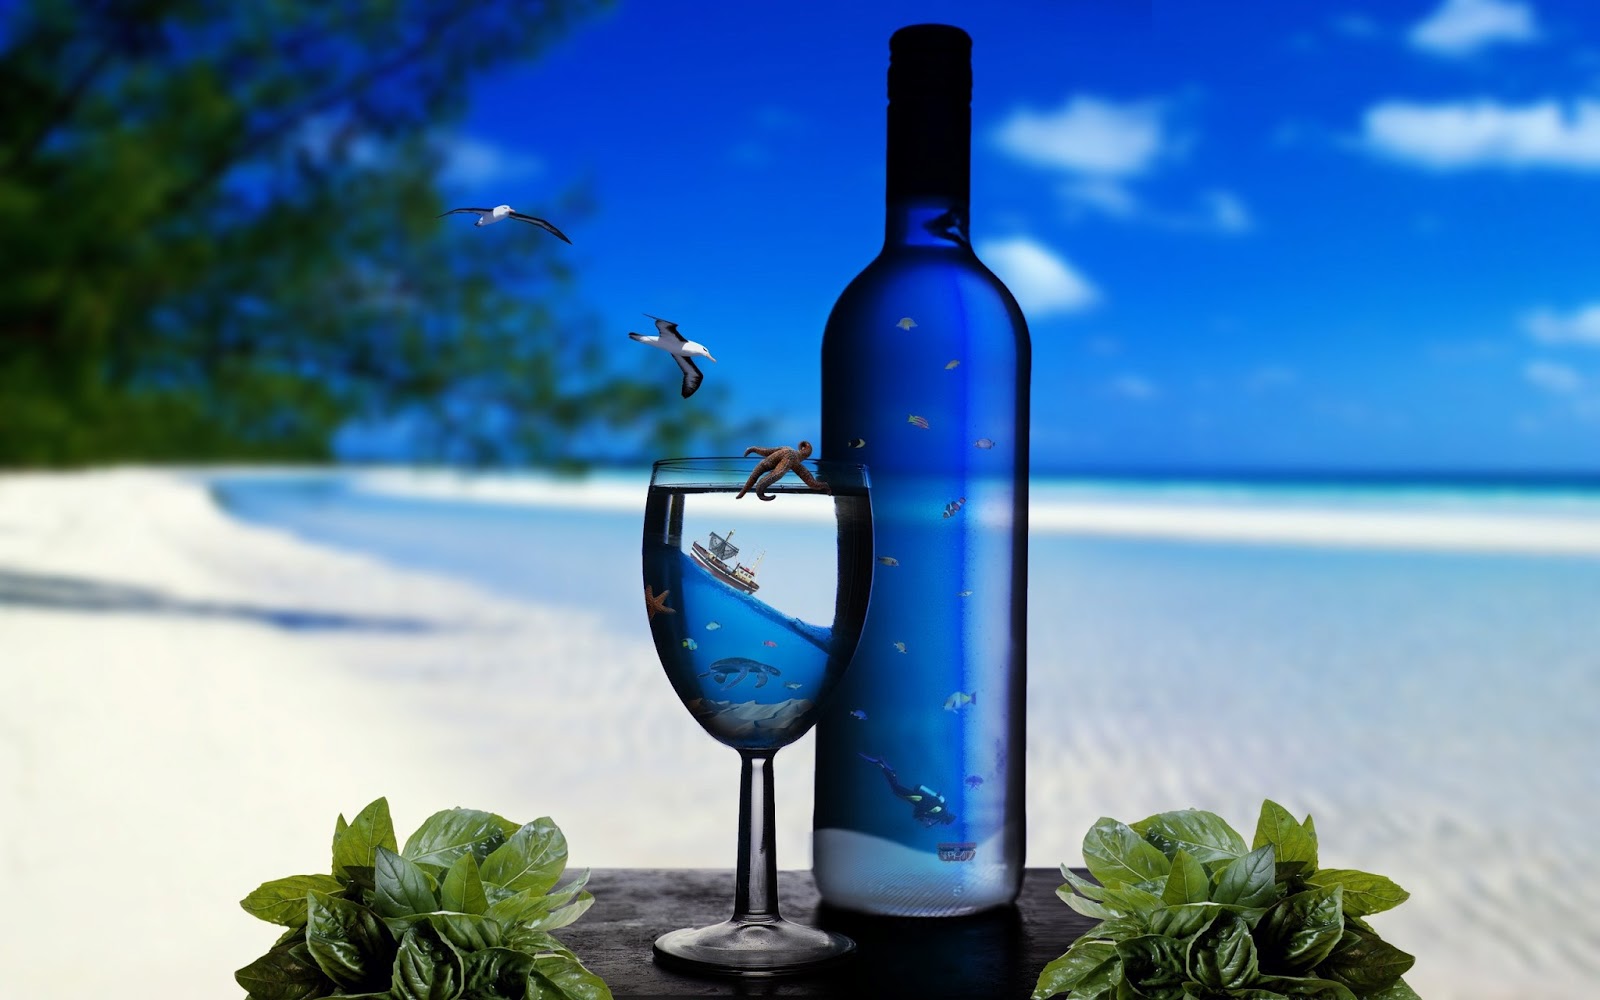 Drinks hd wallpapers, high definition free wallpapers | Amazing ...